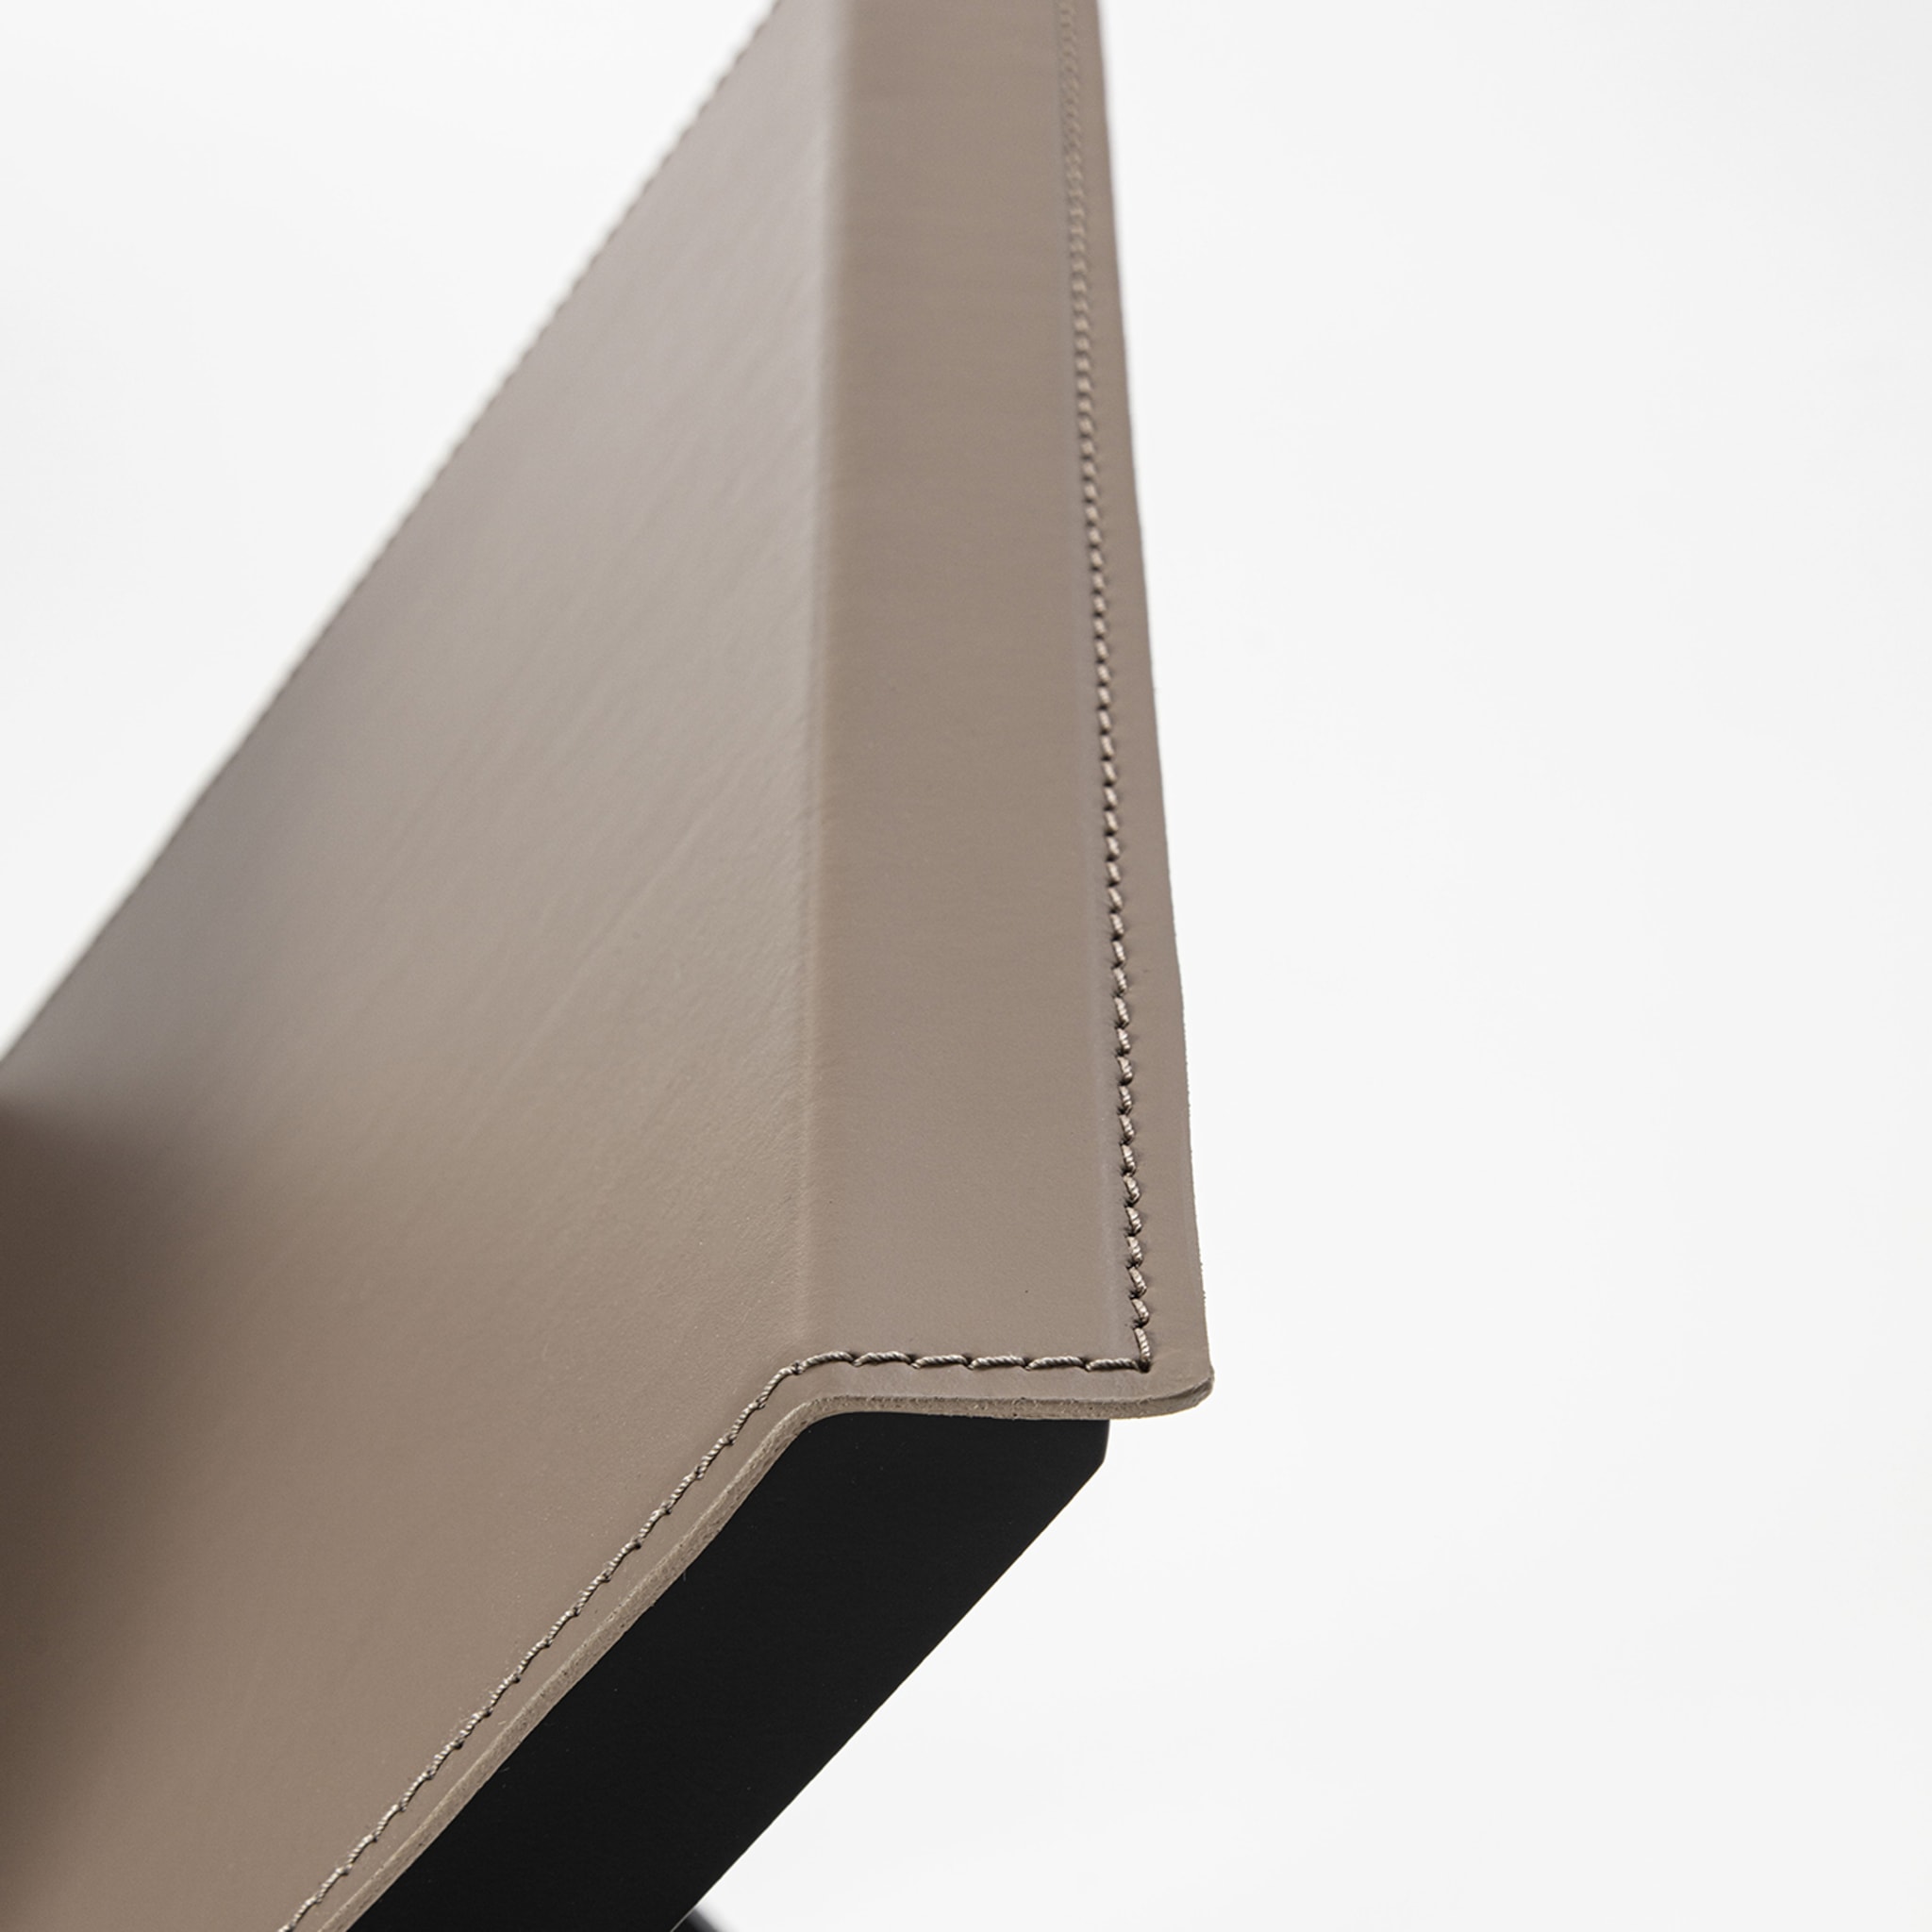 Crossover X-Shaped Taupe Magazine Rack - Alternative view 2